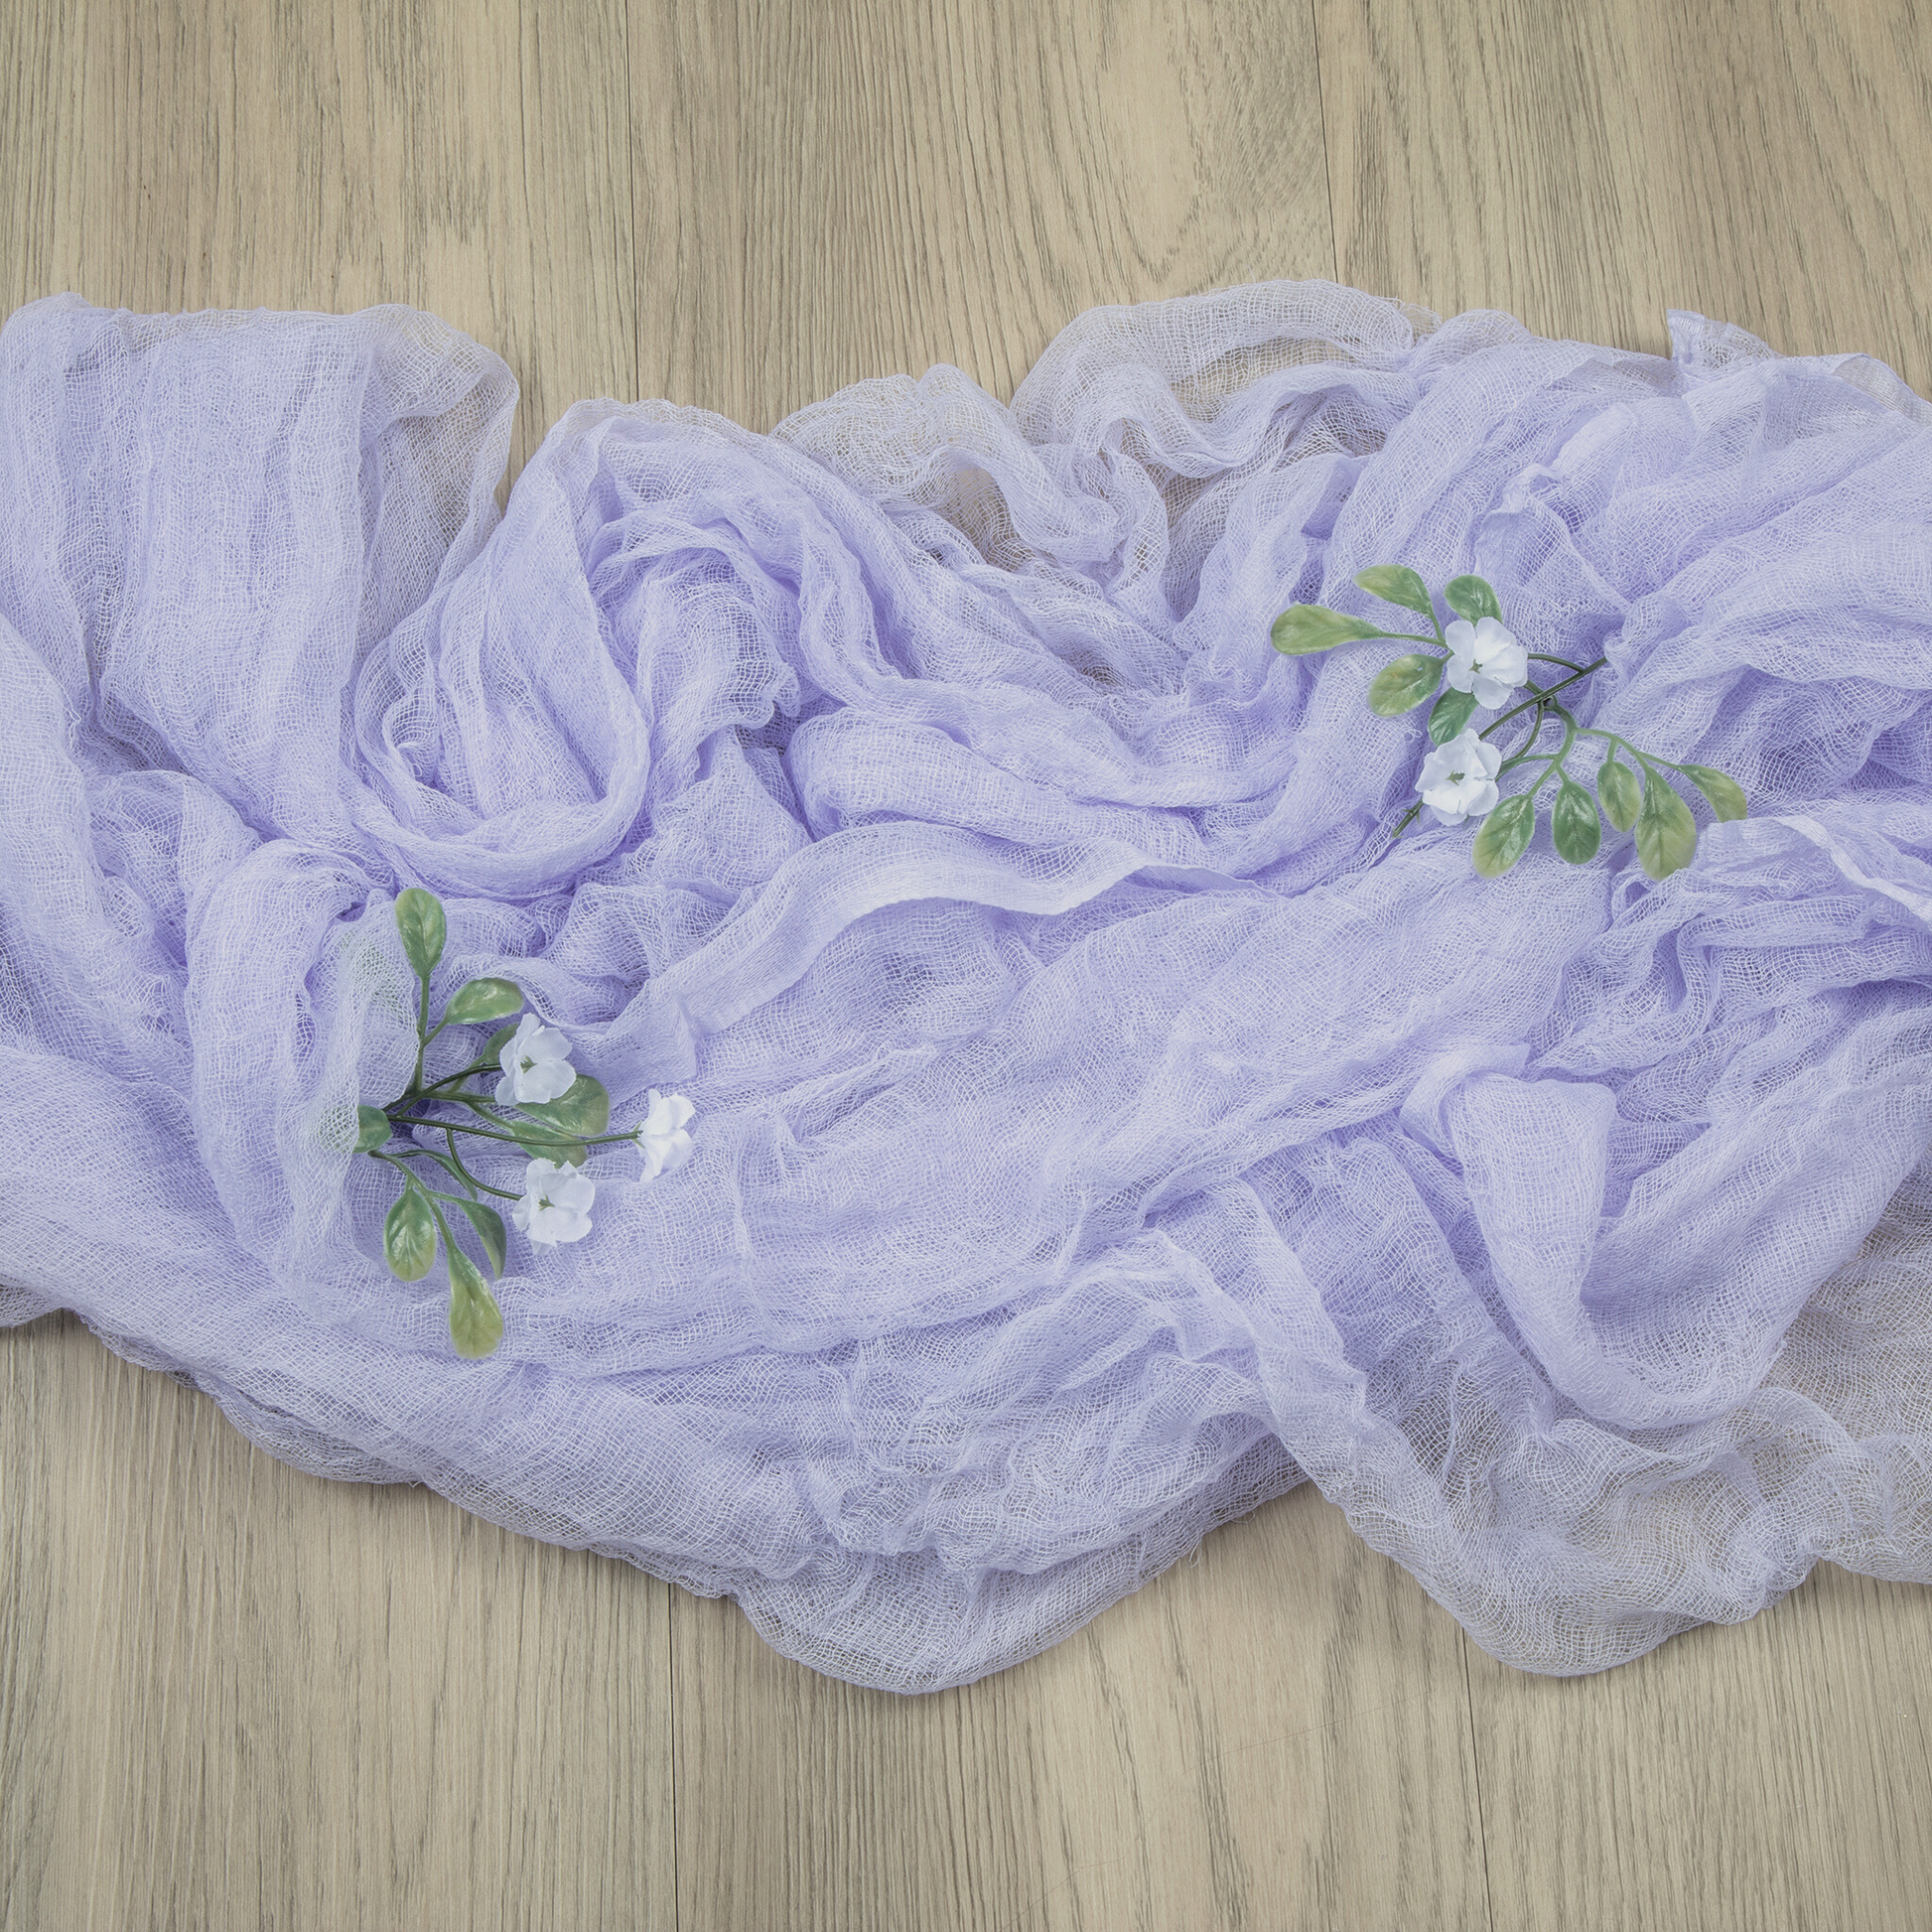 Cheesecloth Table Runner 25" x 16ft - Lavender